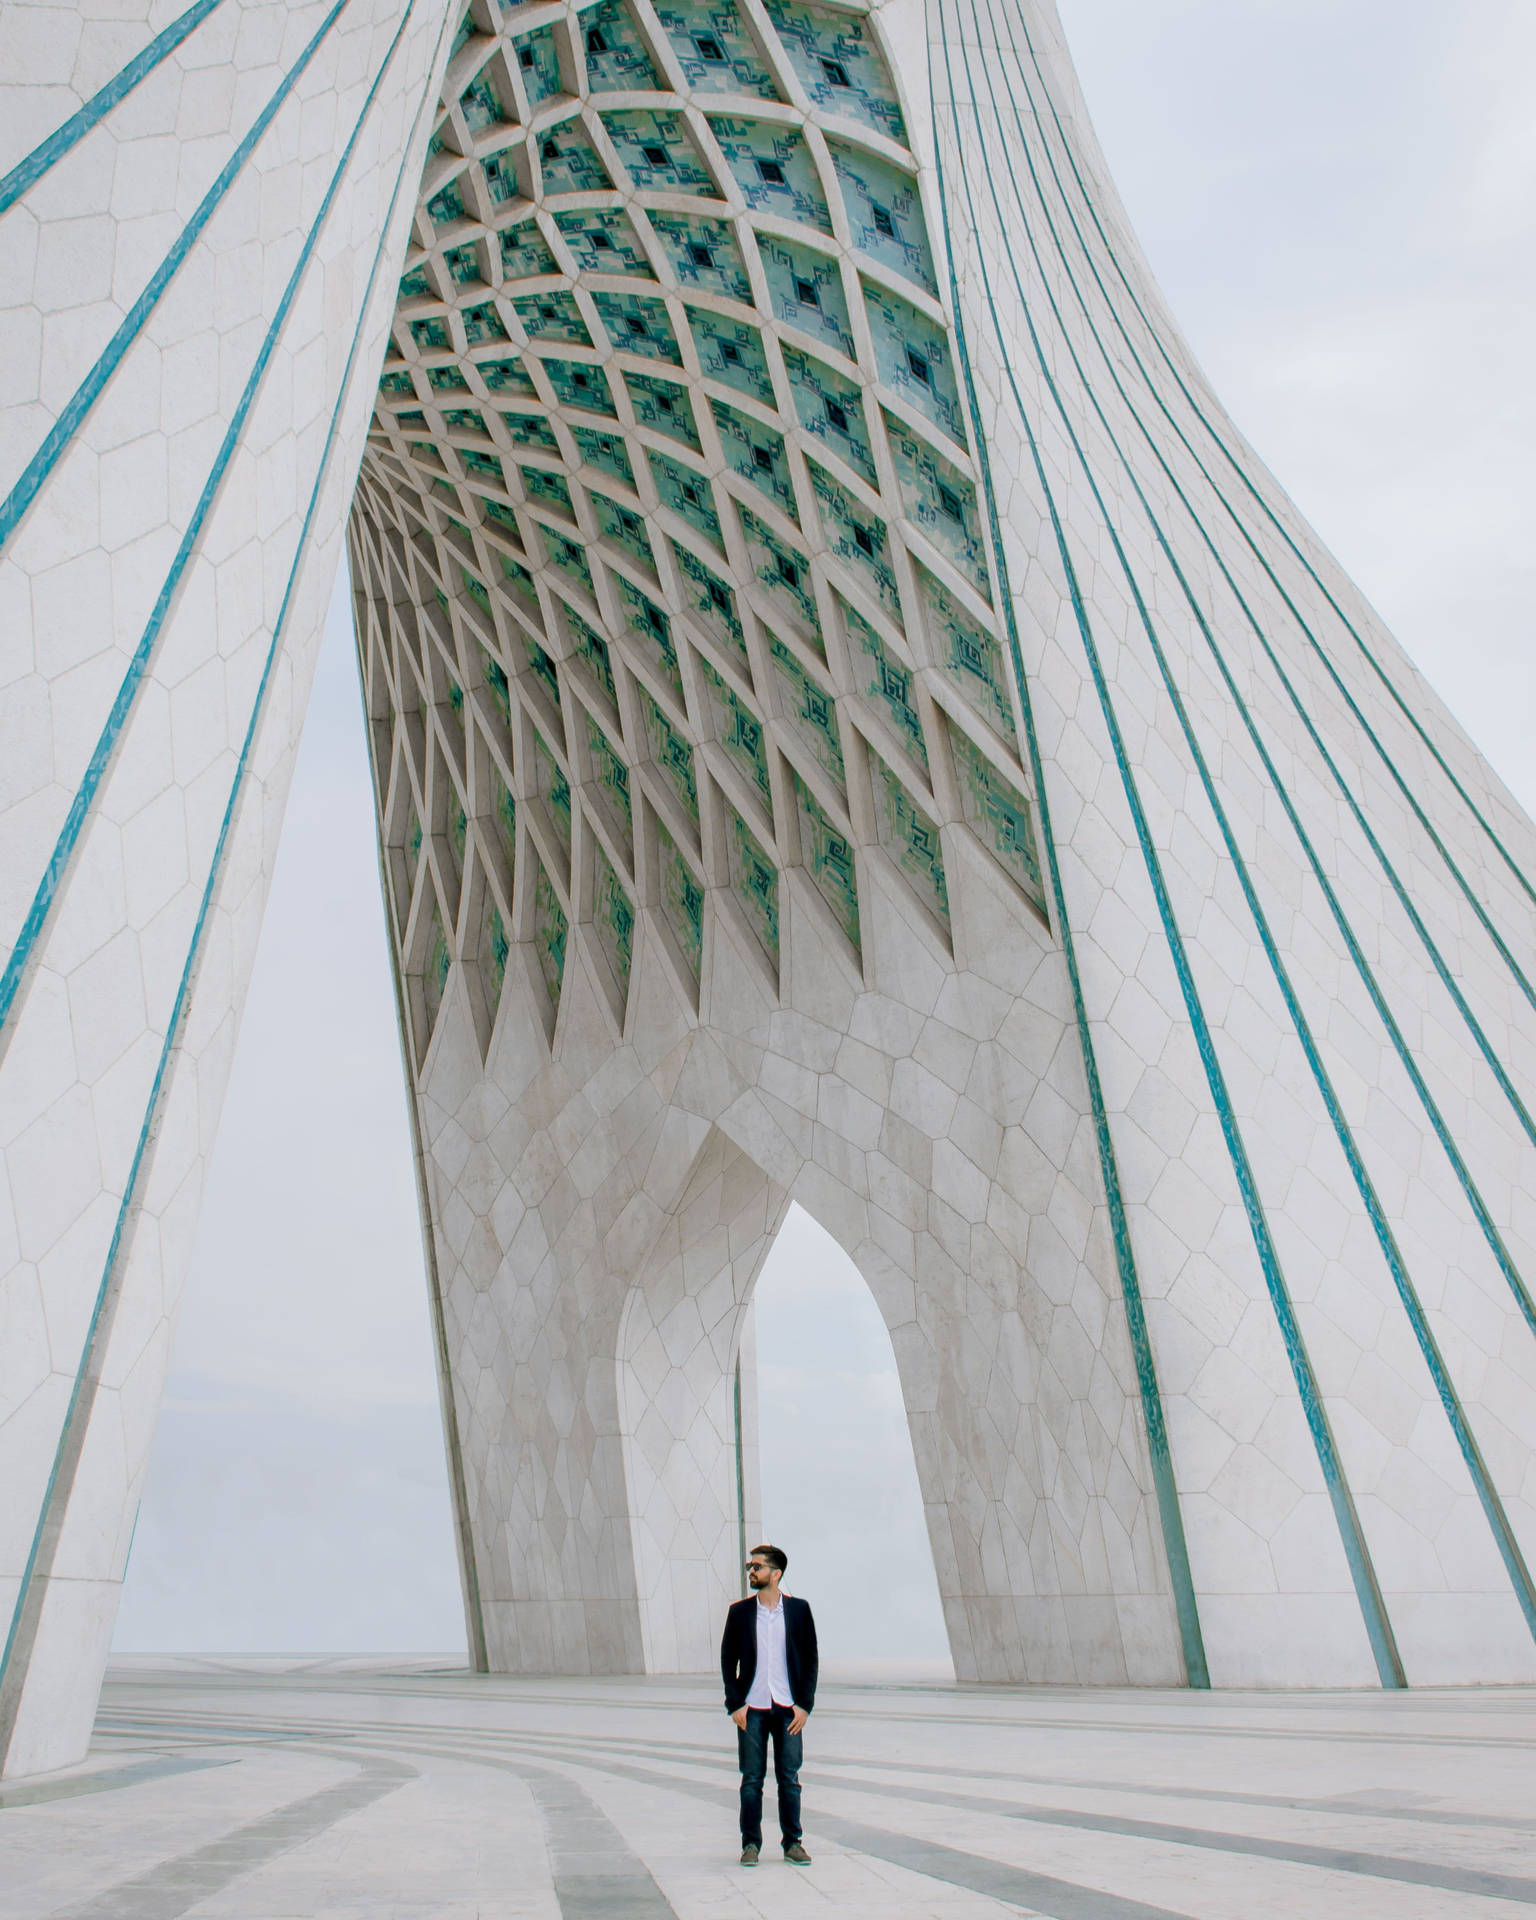 Caption: Man standing in front of the Azadi Tower in Tehran, Iran Wallpaper